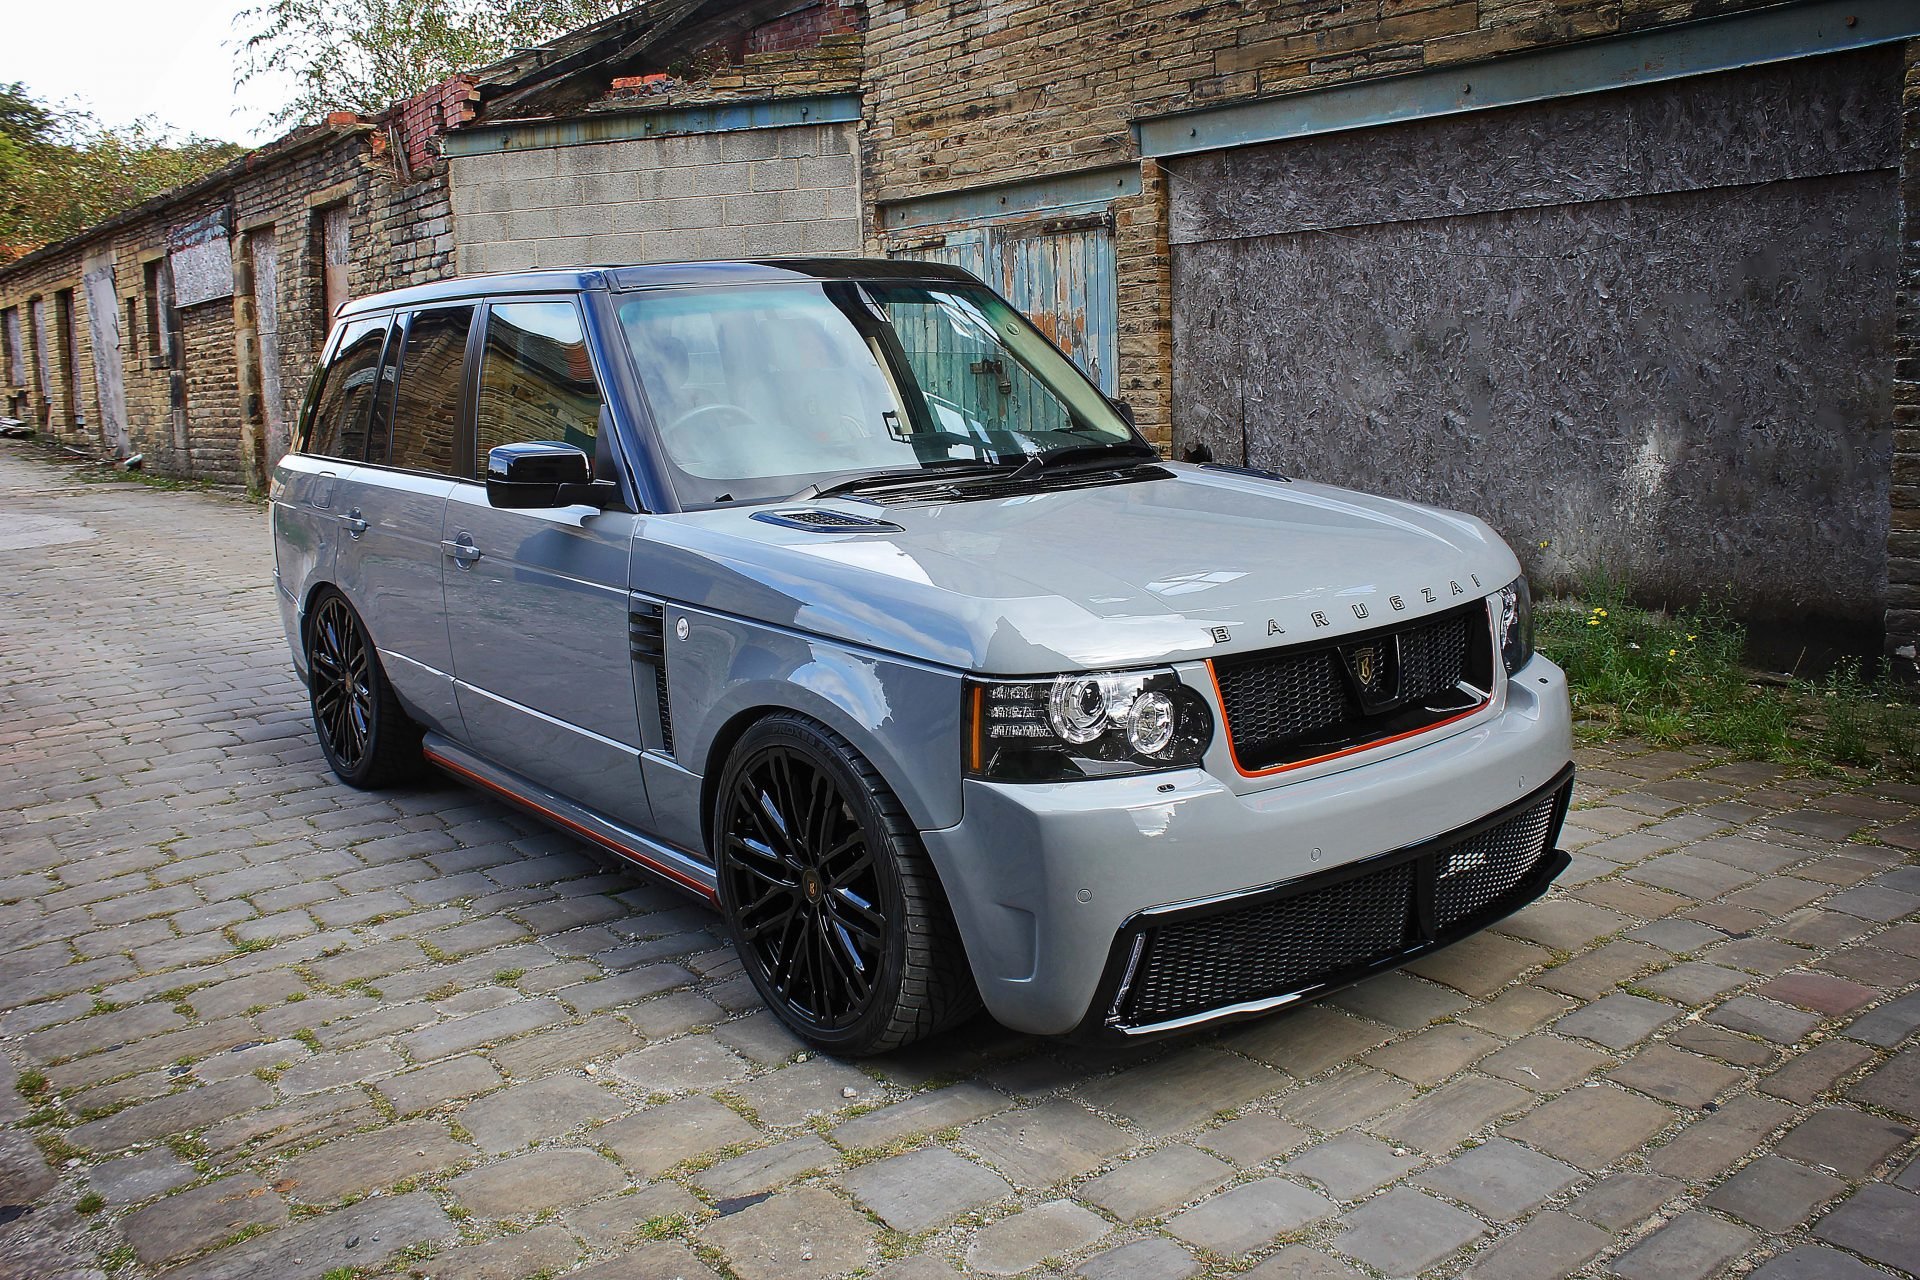 Check our price and buy Barugzai Classic body kit for Land Rover Range Rover Vogue